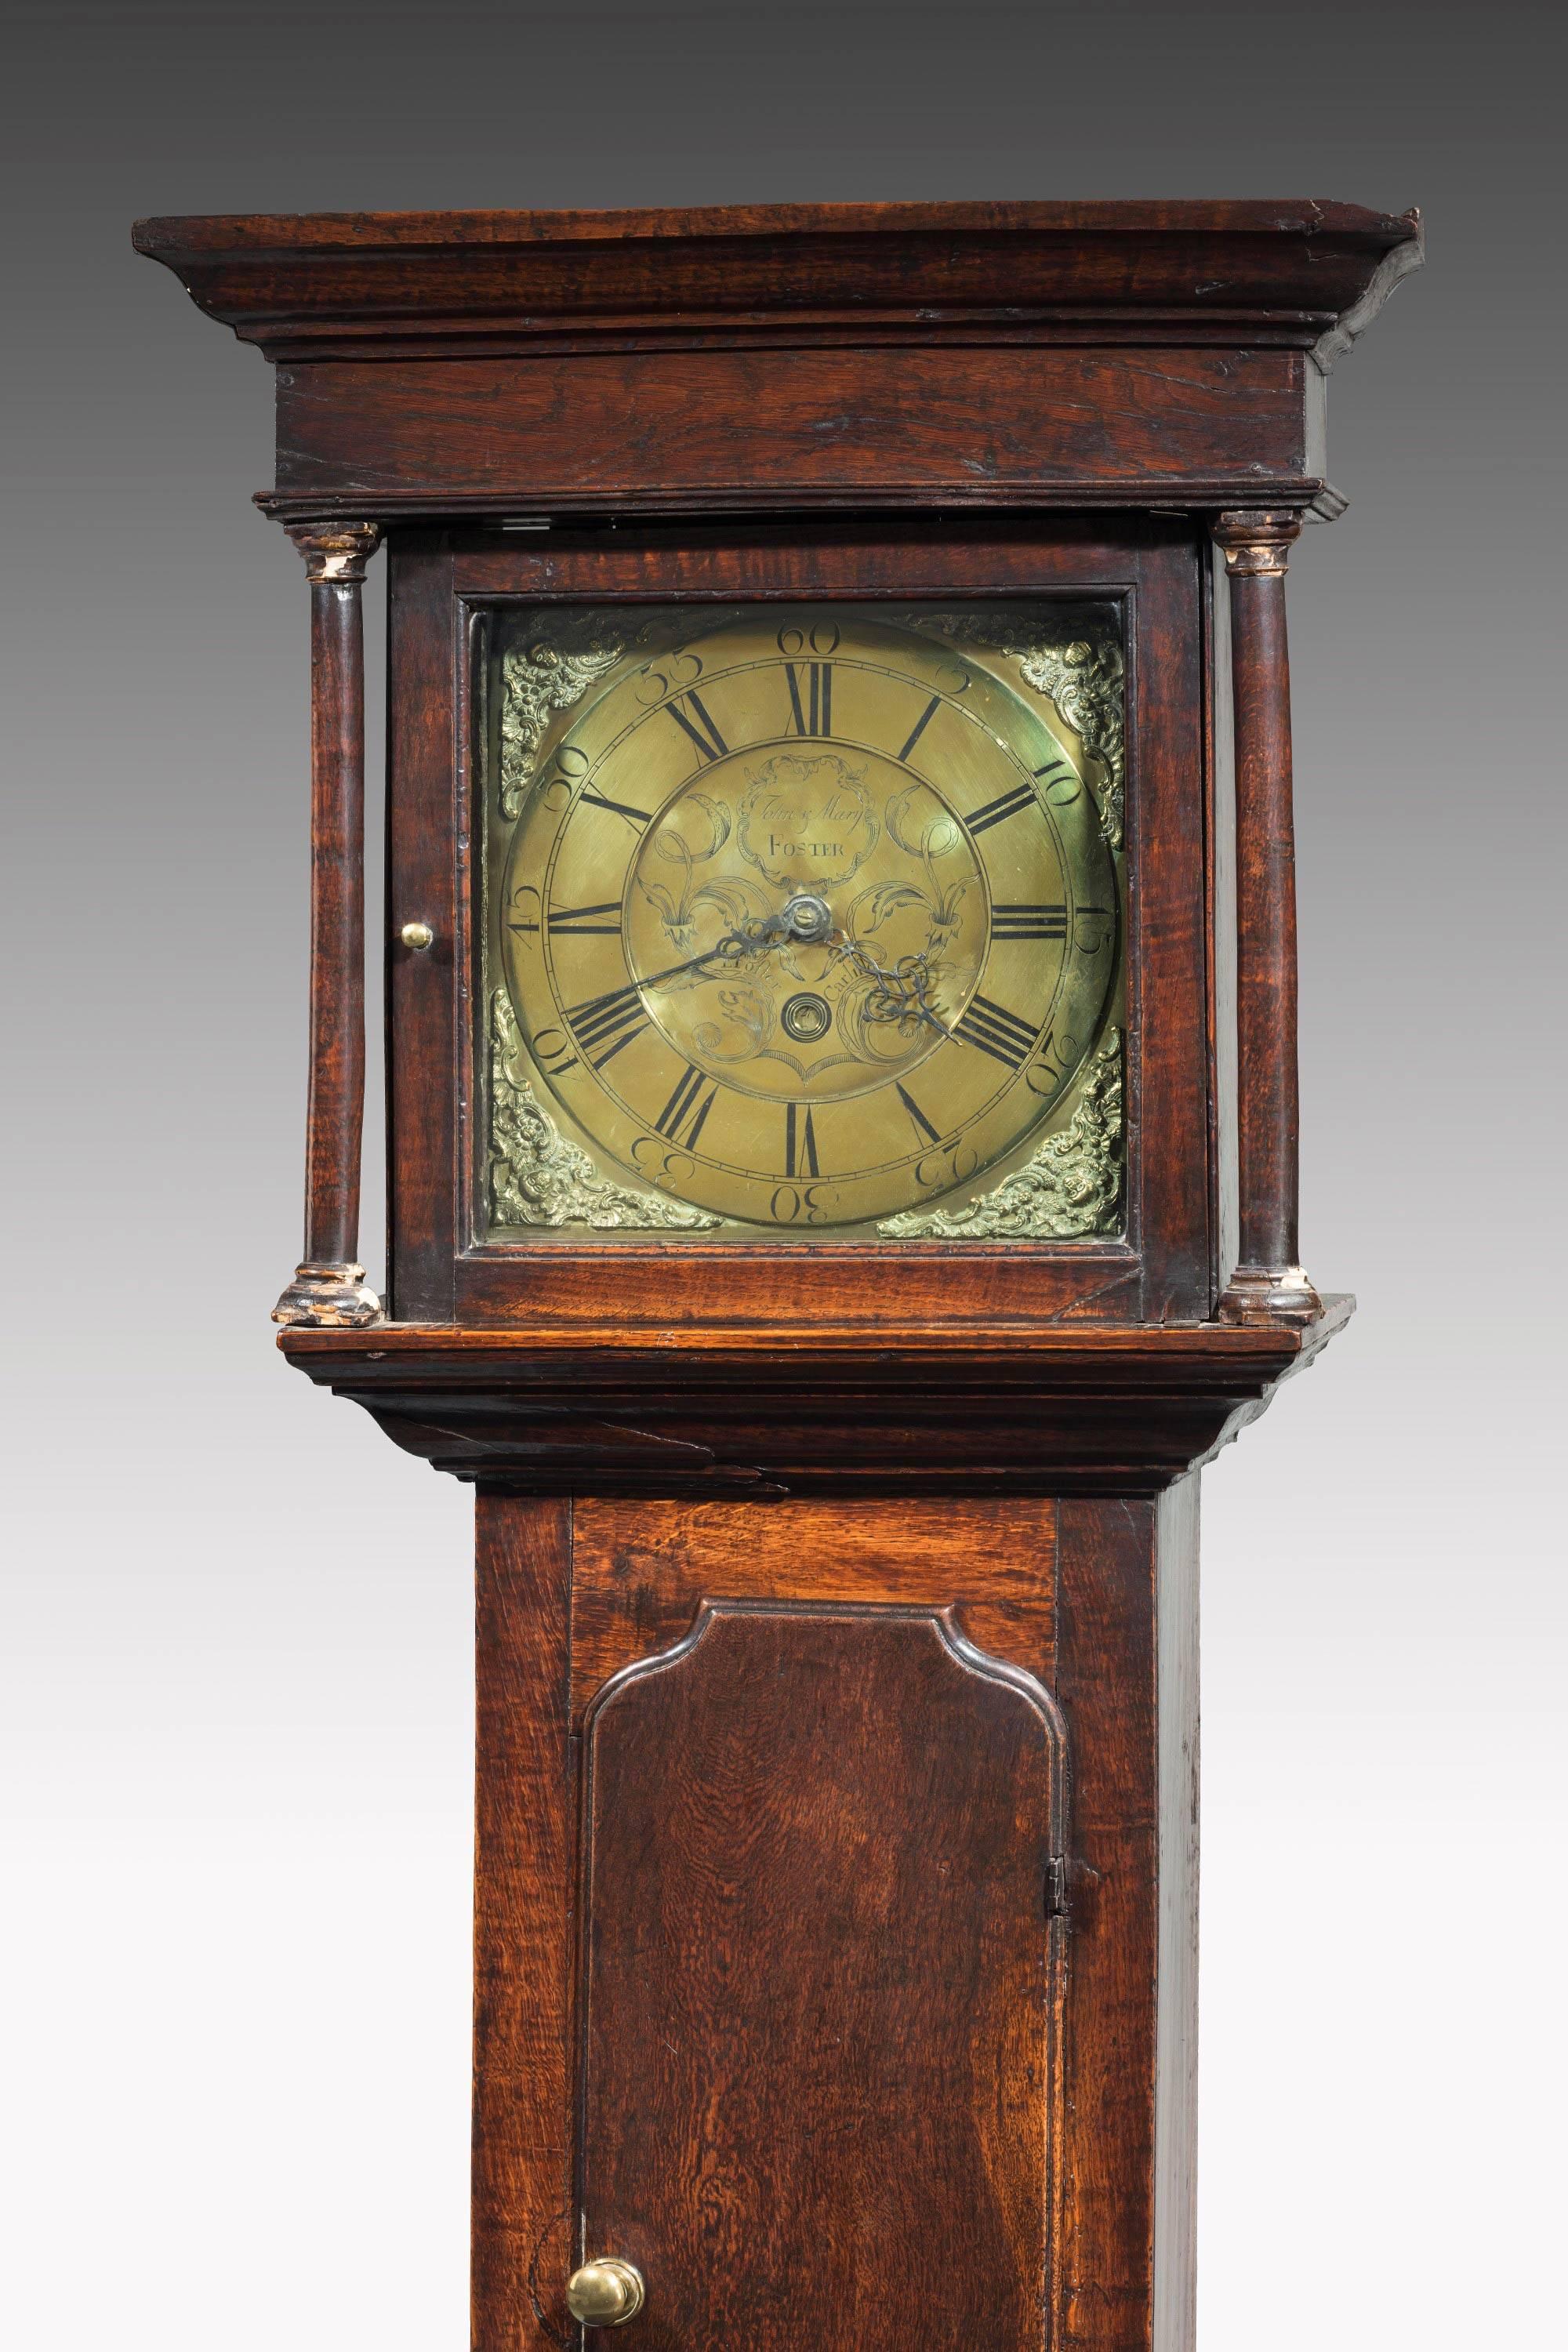 George III period oak longcase clock by E. Foster of Carlisle, with thirty-hour movement, long trunk door and 12-inch brass square dial with date aperture, also inscribed 